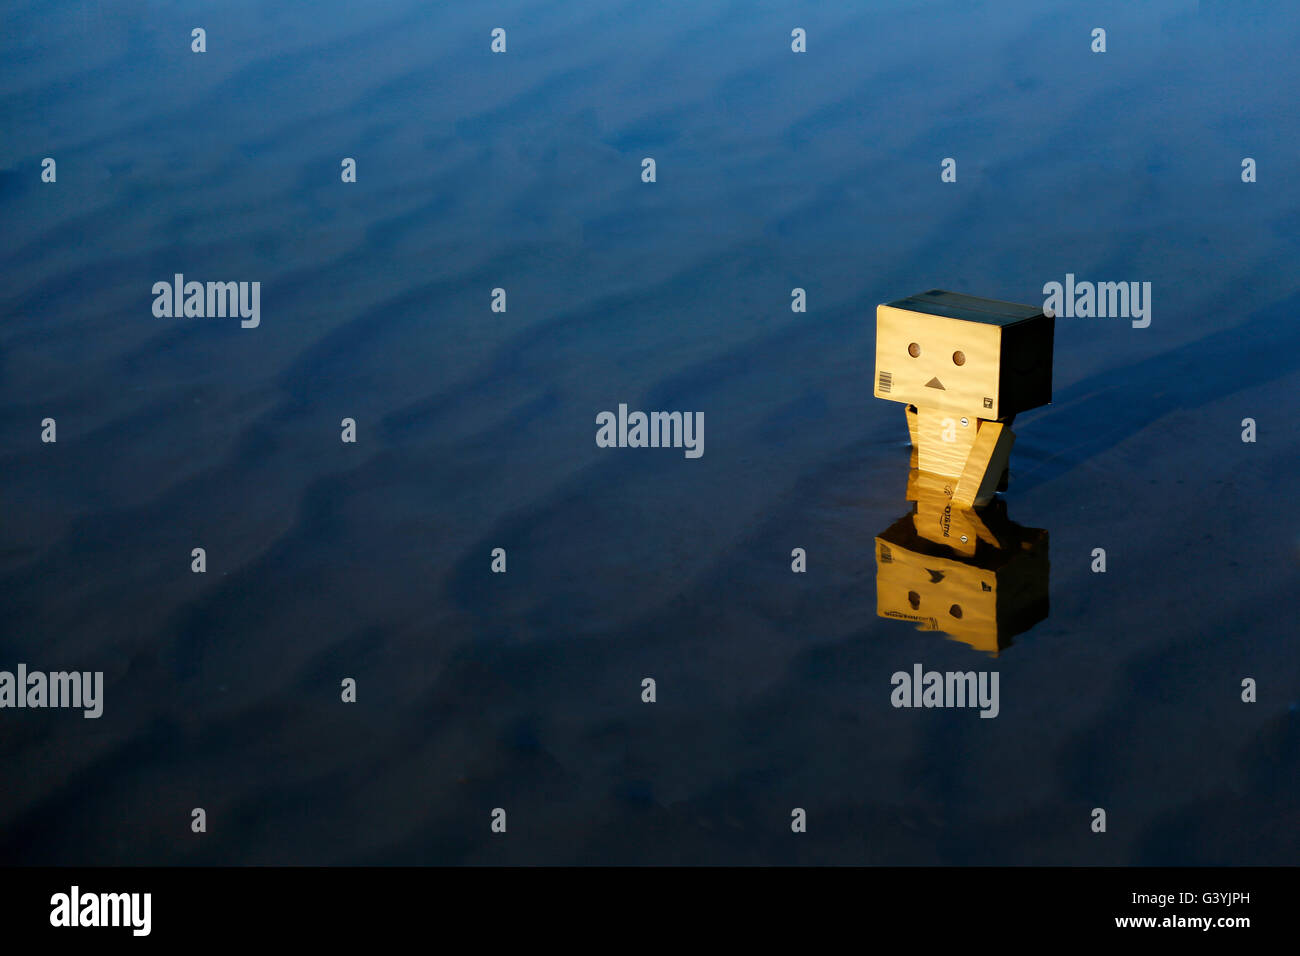 A Danbo Danboard fictional Robot Character walking through a shallow pool of water on a beach Stock Photo